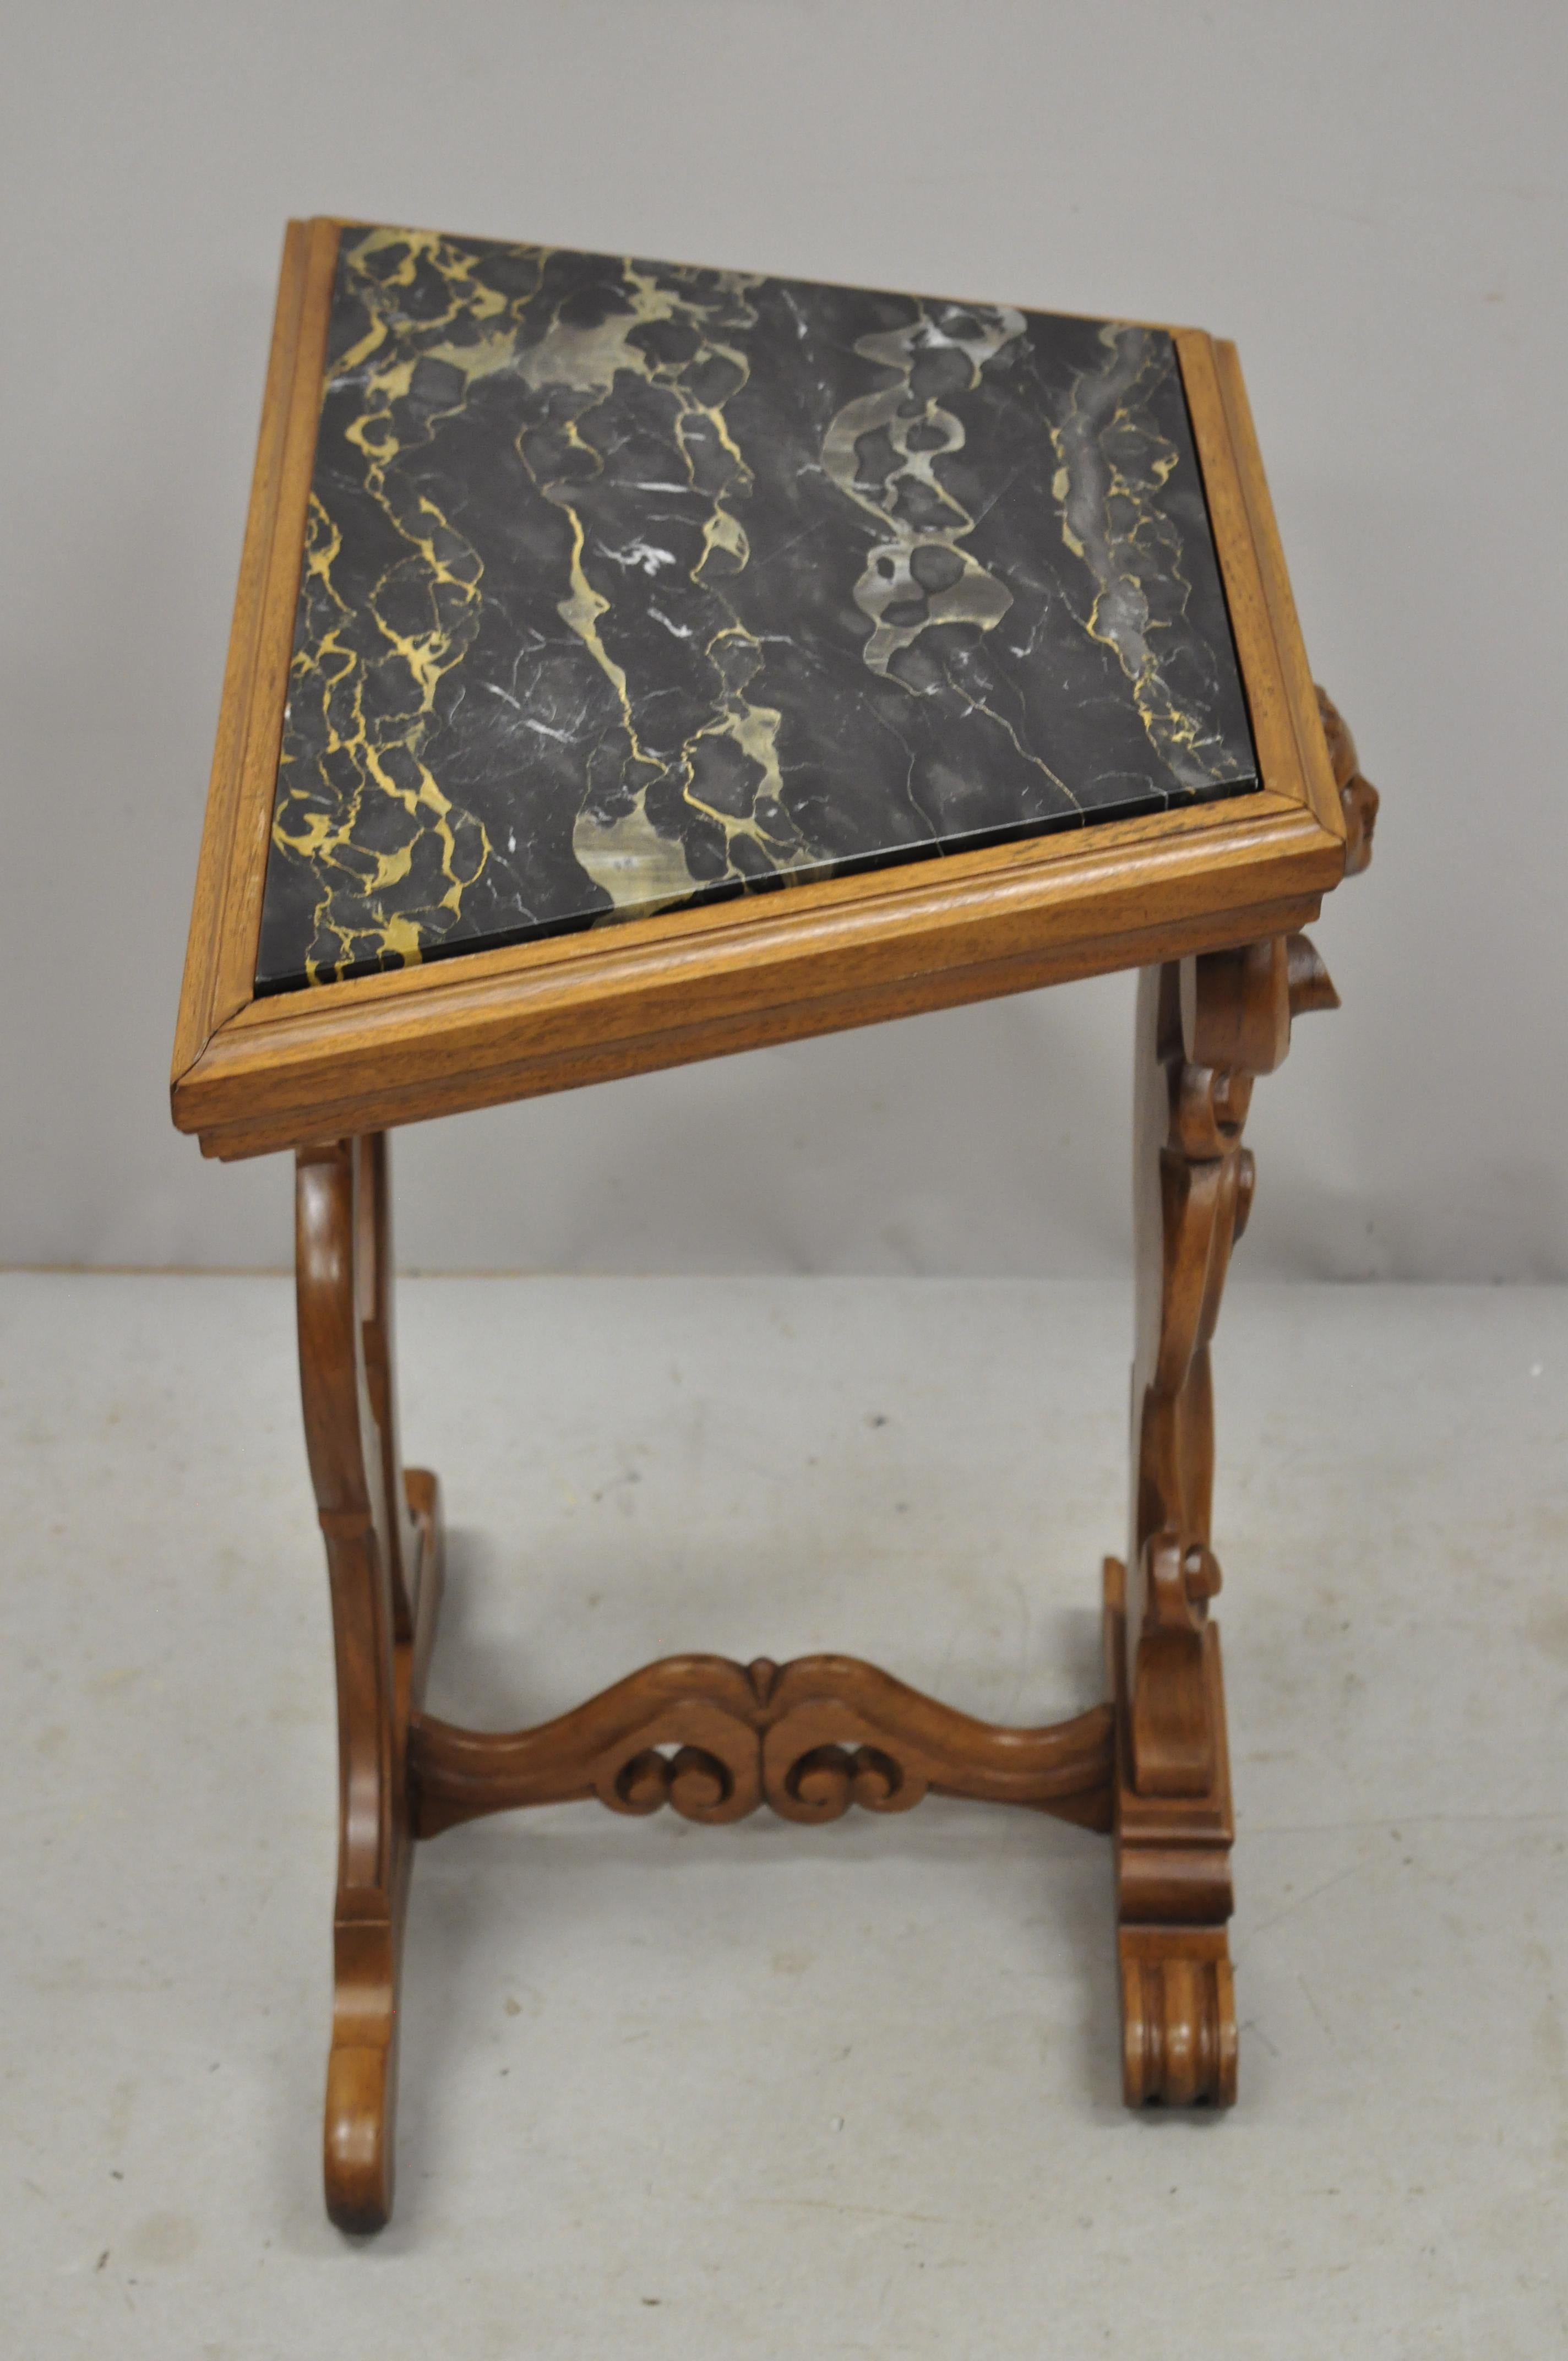 Italian Renaissance Figural Carved Marble Top Side Table with Winged Cherub Head For Sale 5